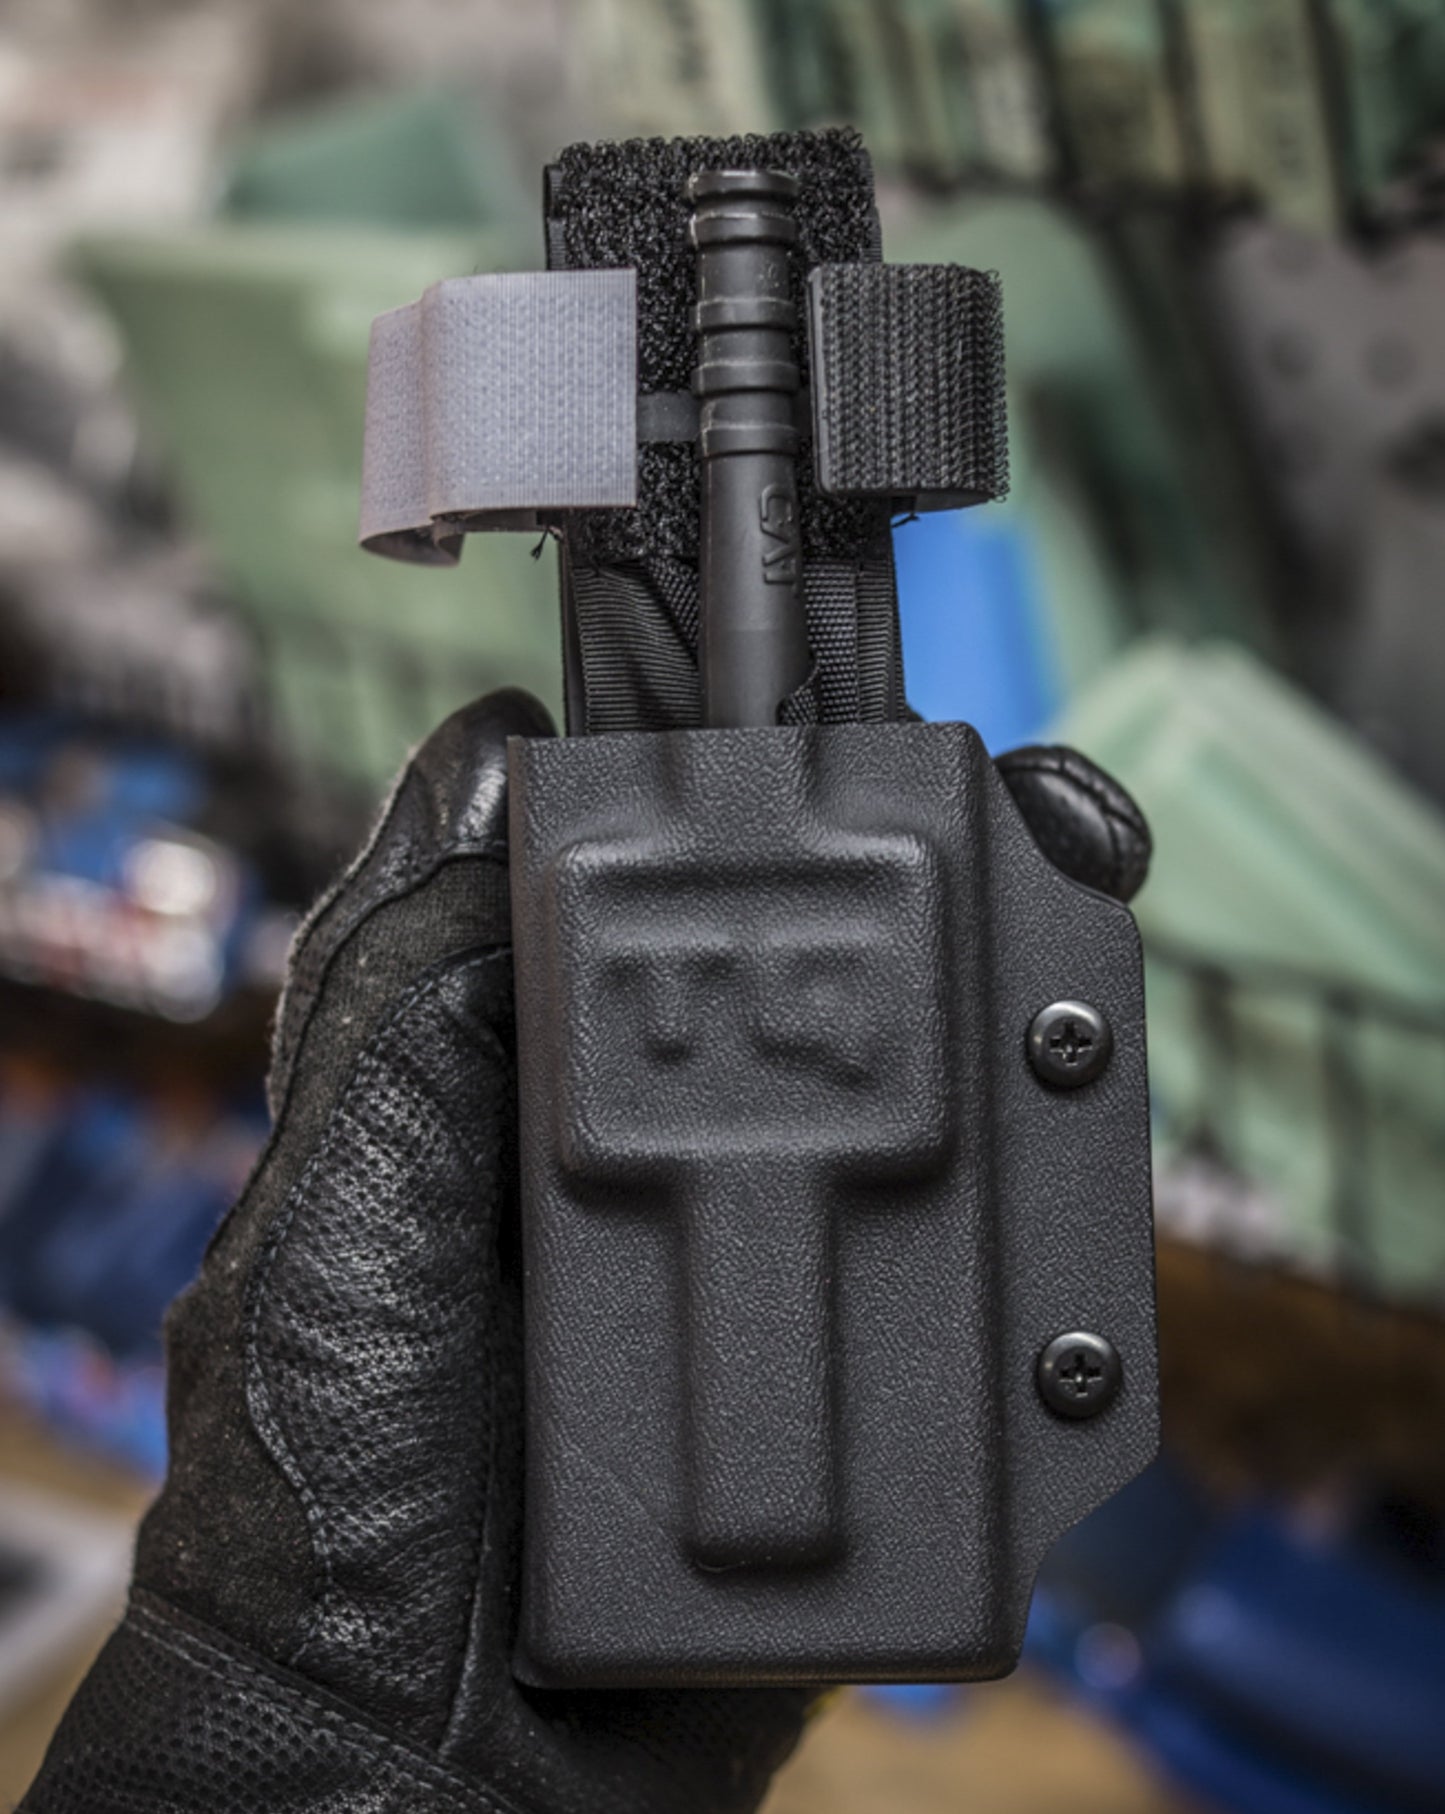 TQ Holder in Black Kydex. Perfect for Law Enforcement who have to have black for their gear.